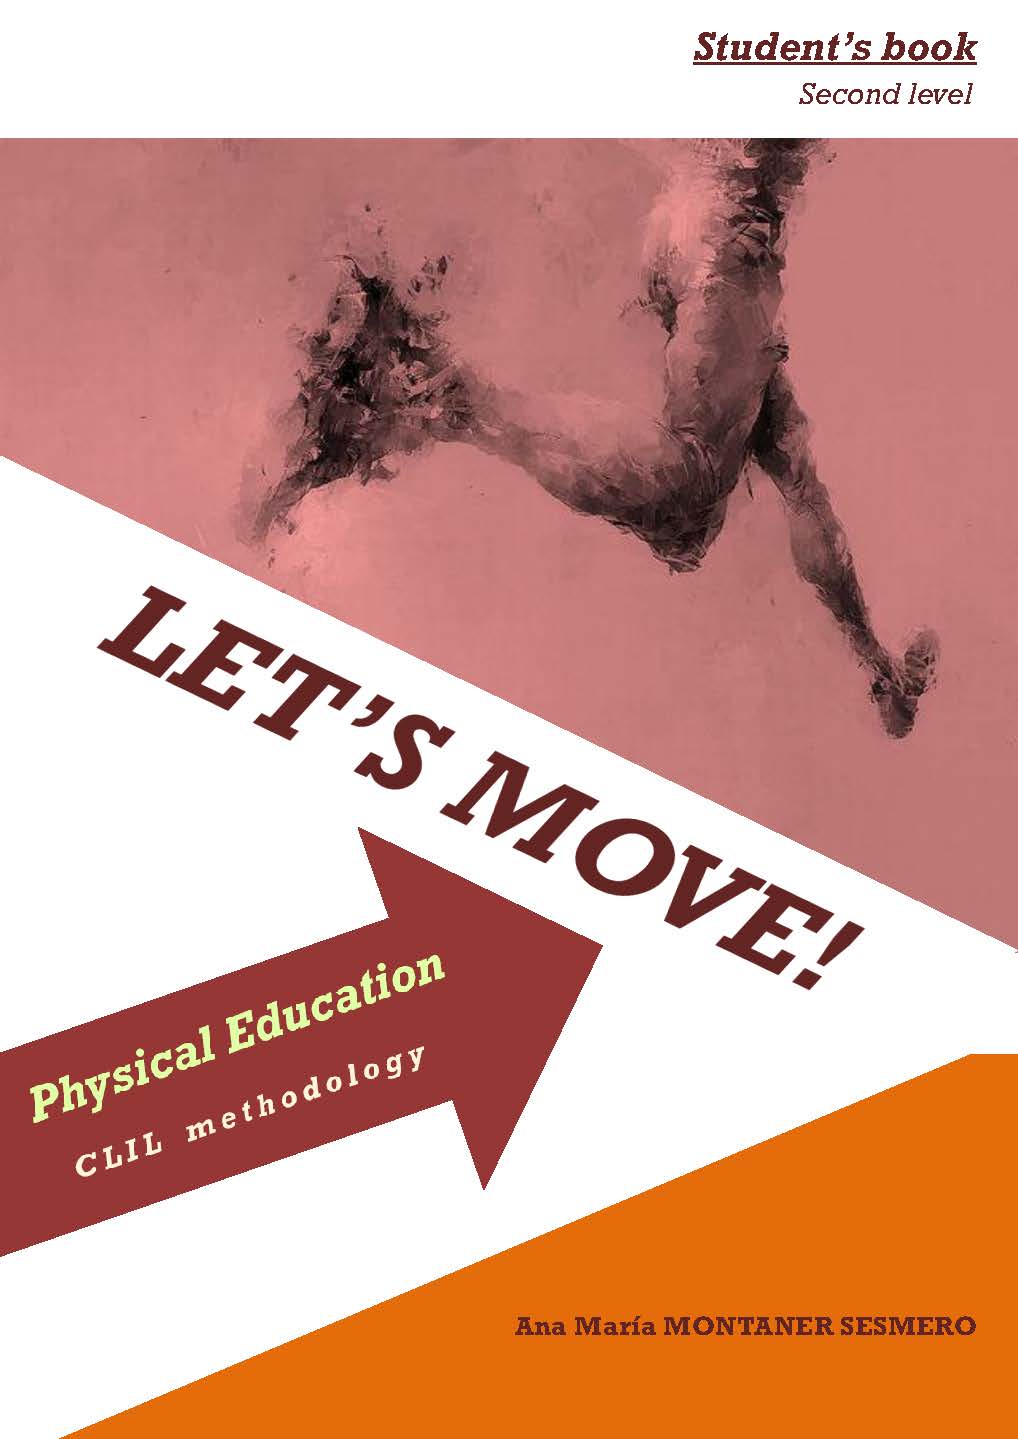 Let's move. Students book 2º ESO